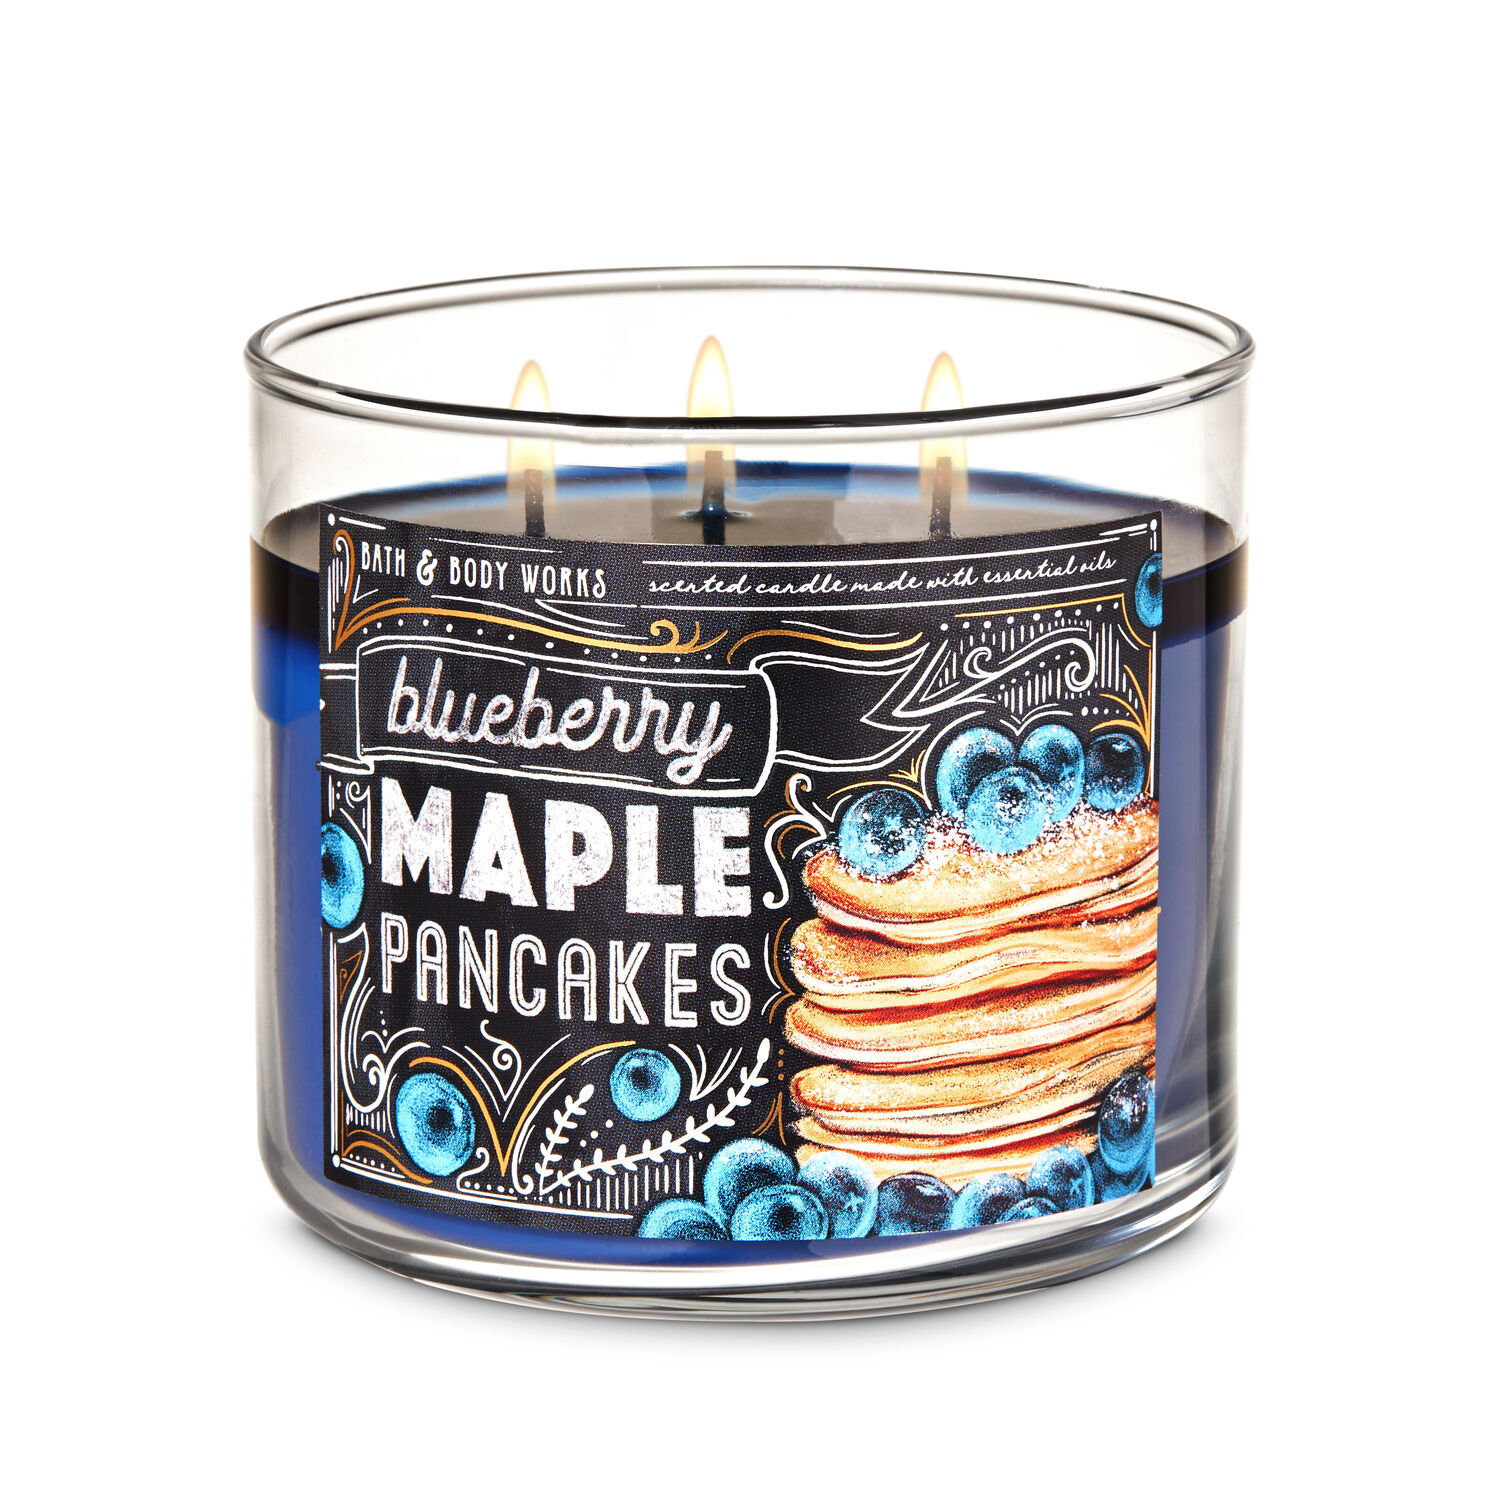 1 Bath & Body Works BLUEBERRY MAPLE PANCAKES Large 3-Wick Scented Candle 14.5 oz 